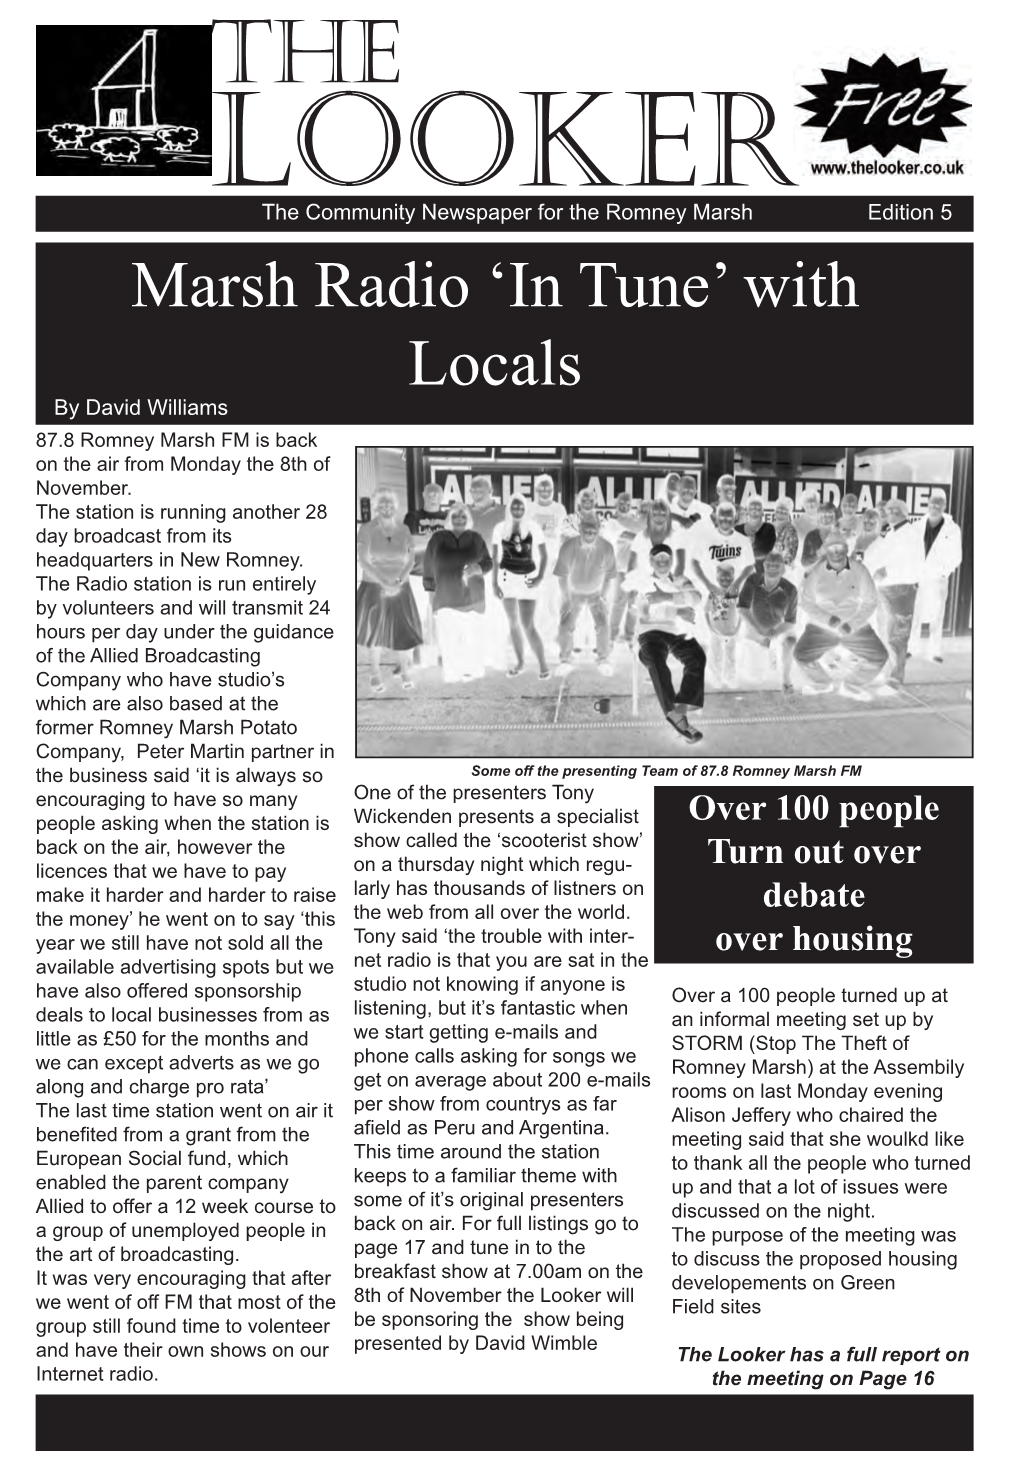 Marsh Radio ‘In Tune’ with Locals by David Williams 87.8 Romney Marsh FM Is Back on the Air from Monday the 8Th of November